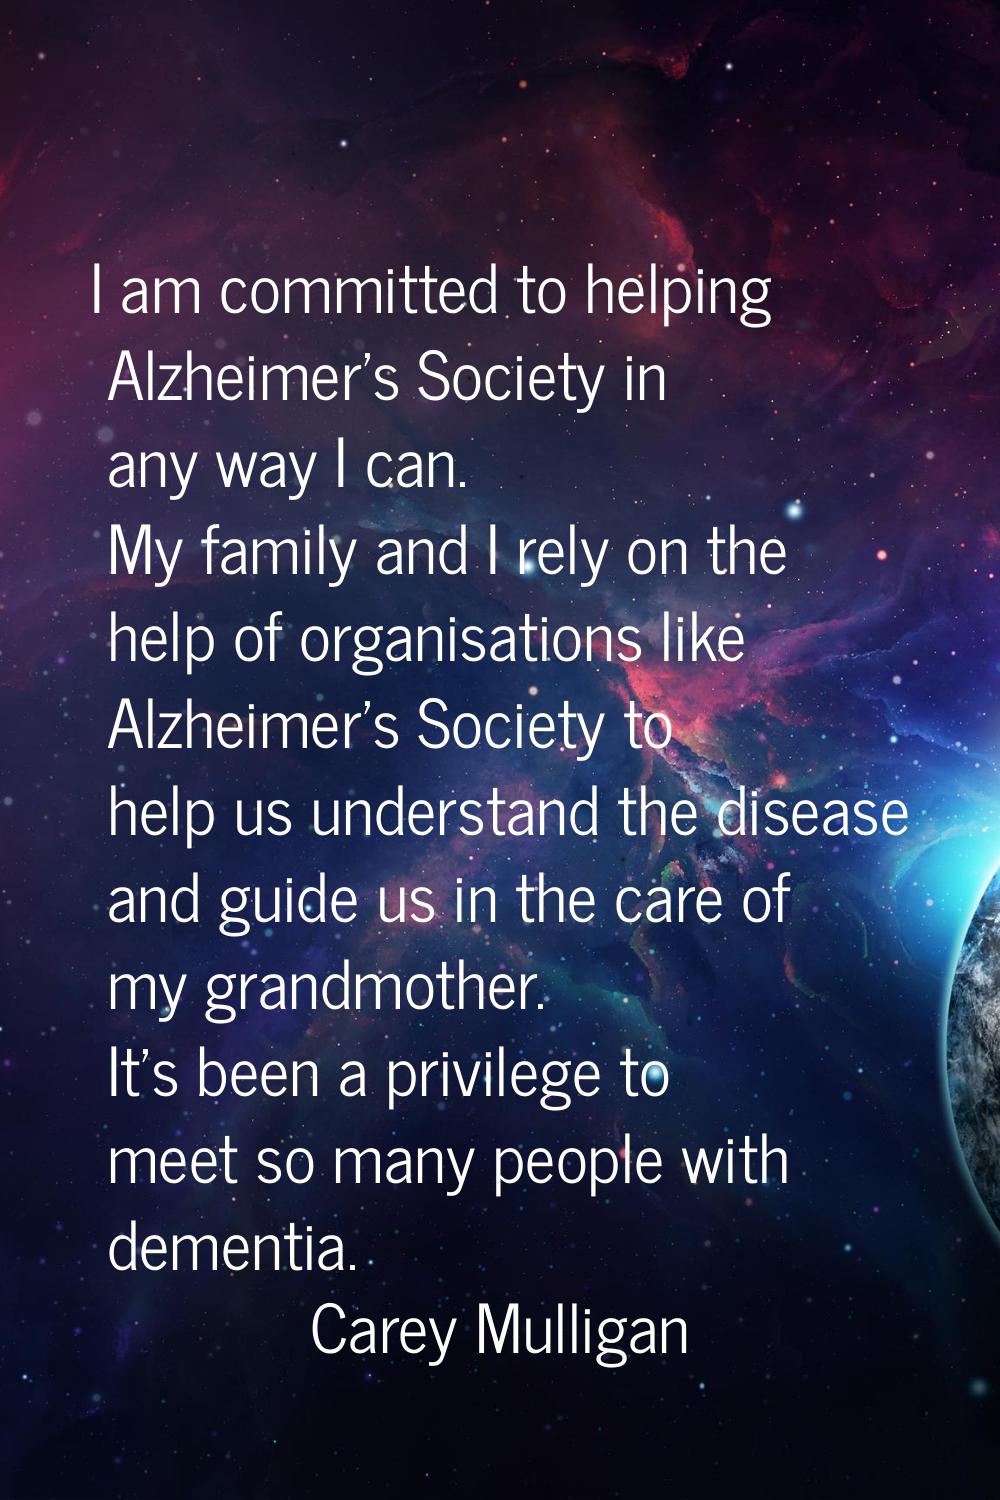 I am committed to helping Alzheimer's Society in any way I can. My family and I rely on the help of